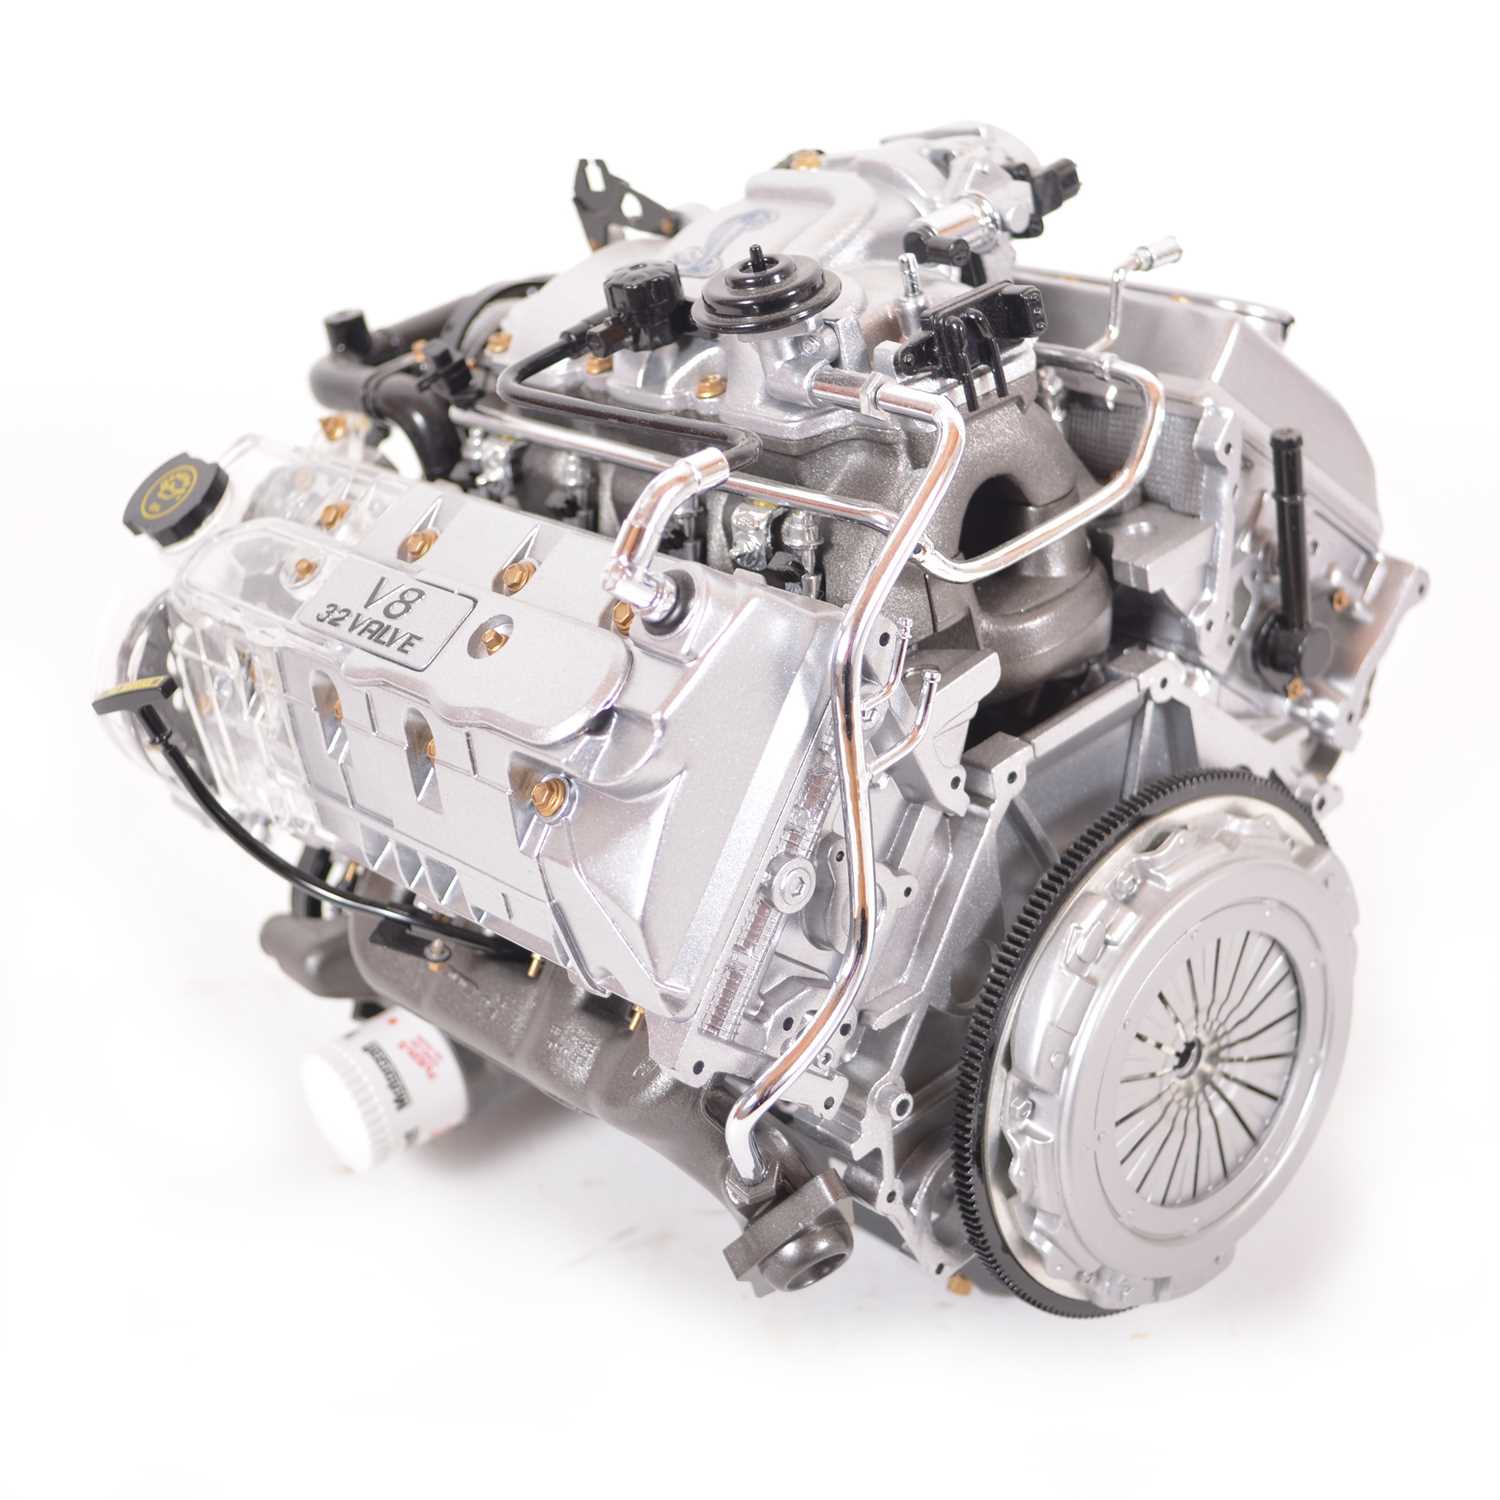 Ford Motor Company TSO 1:4 scale model engine; Ford Mustang Cobra 4.6 litre DOHC engine - Image 3 of 3